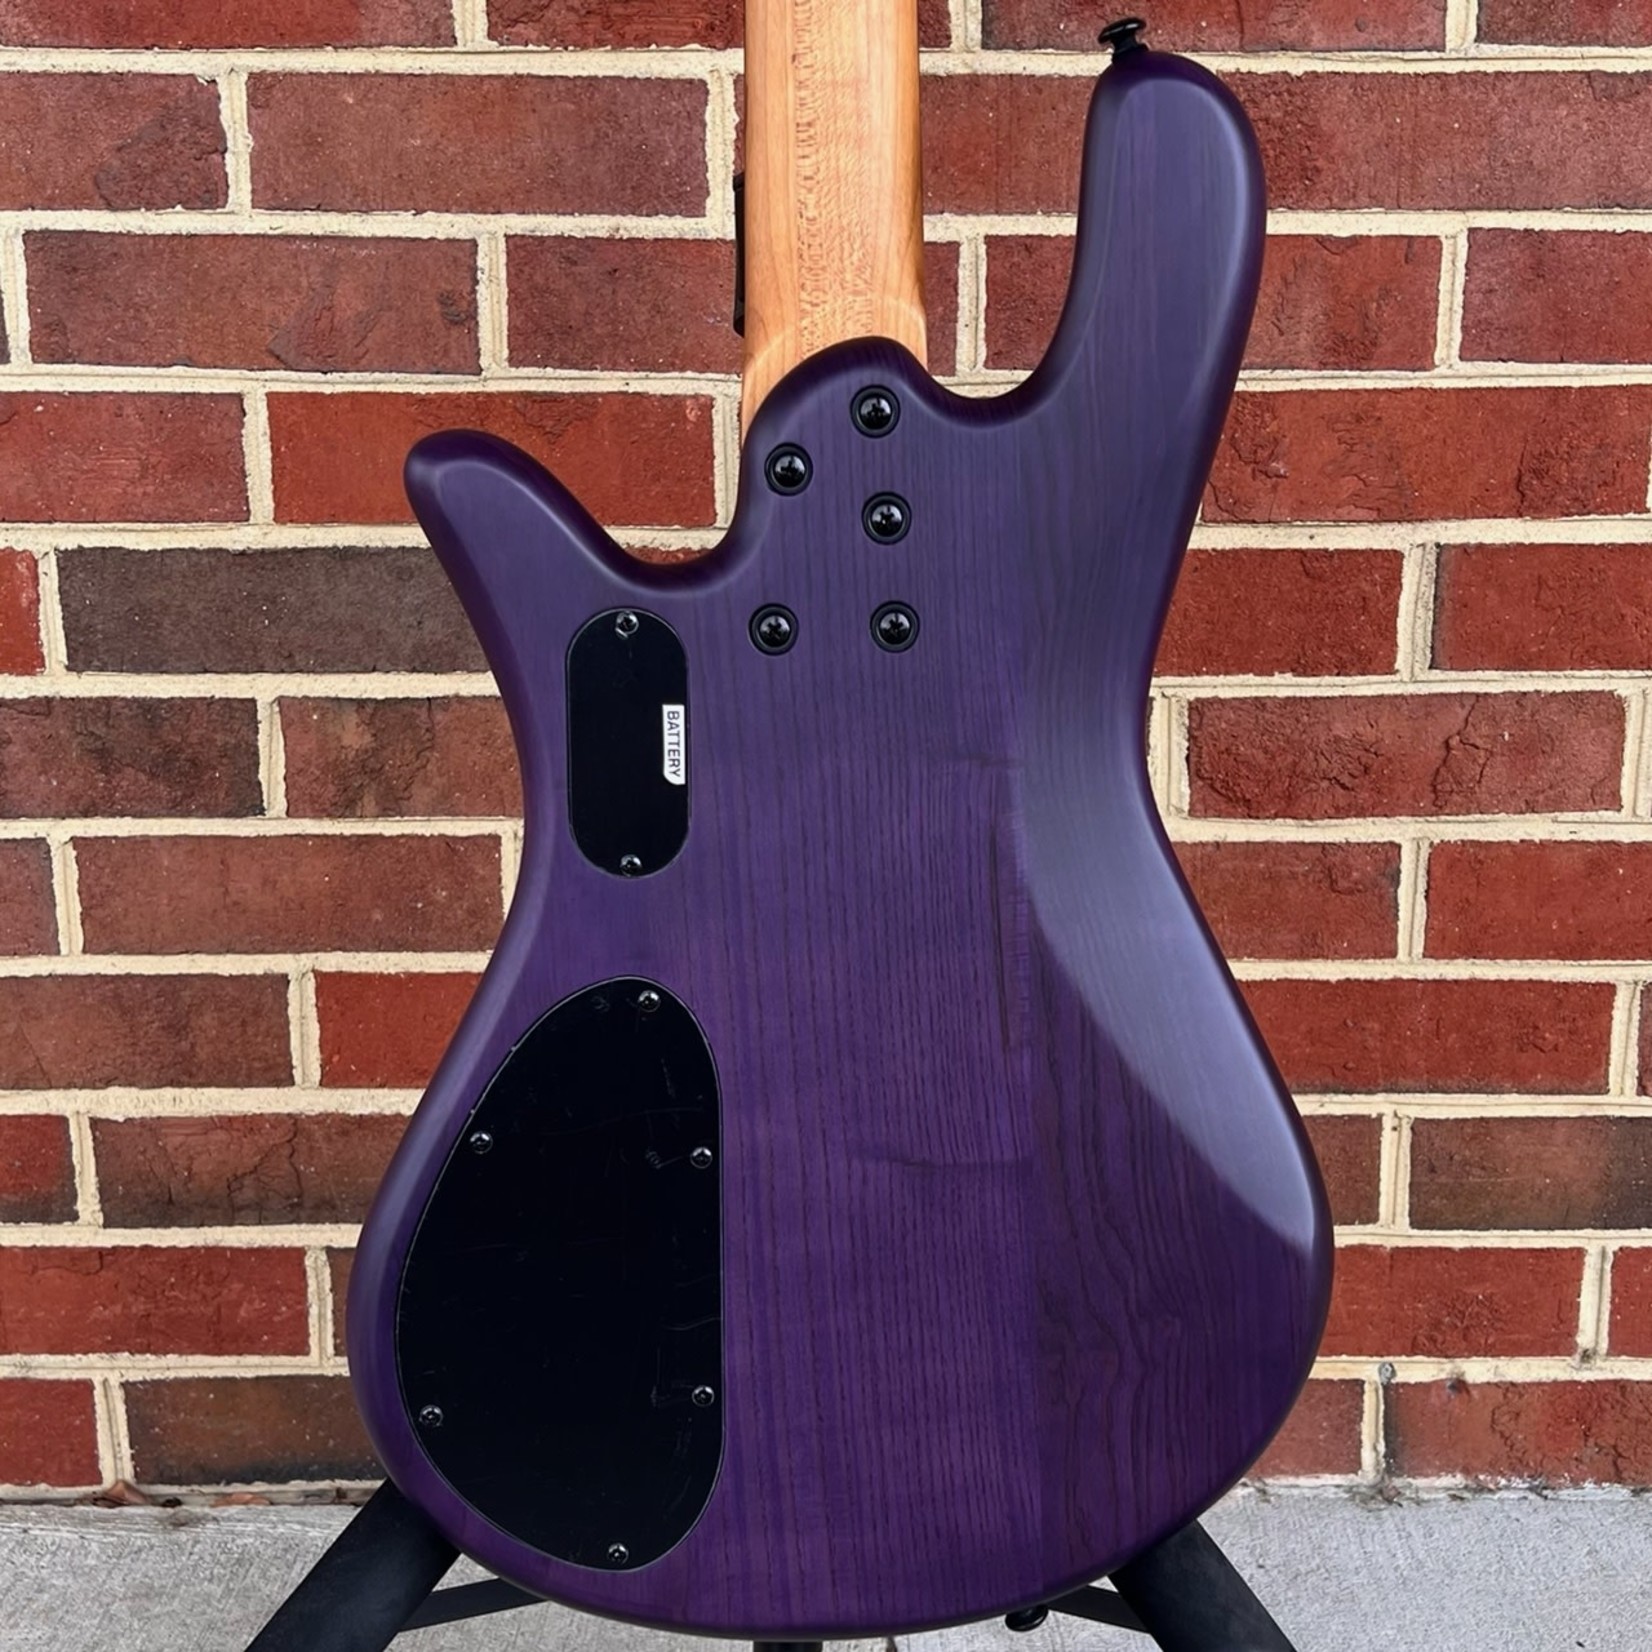 Spector Spector NS Pulse II 4-String, Ultra Violet Matte, Quilted Maple Top, Swamp Ash Body, Roasted Maple Neck, Macassar Ebony Fretboard, Gig Bag, SN# W211417